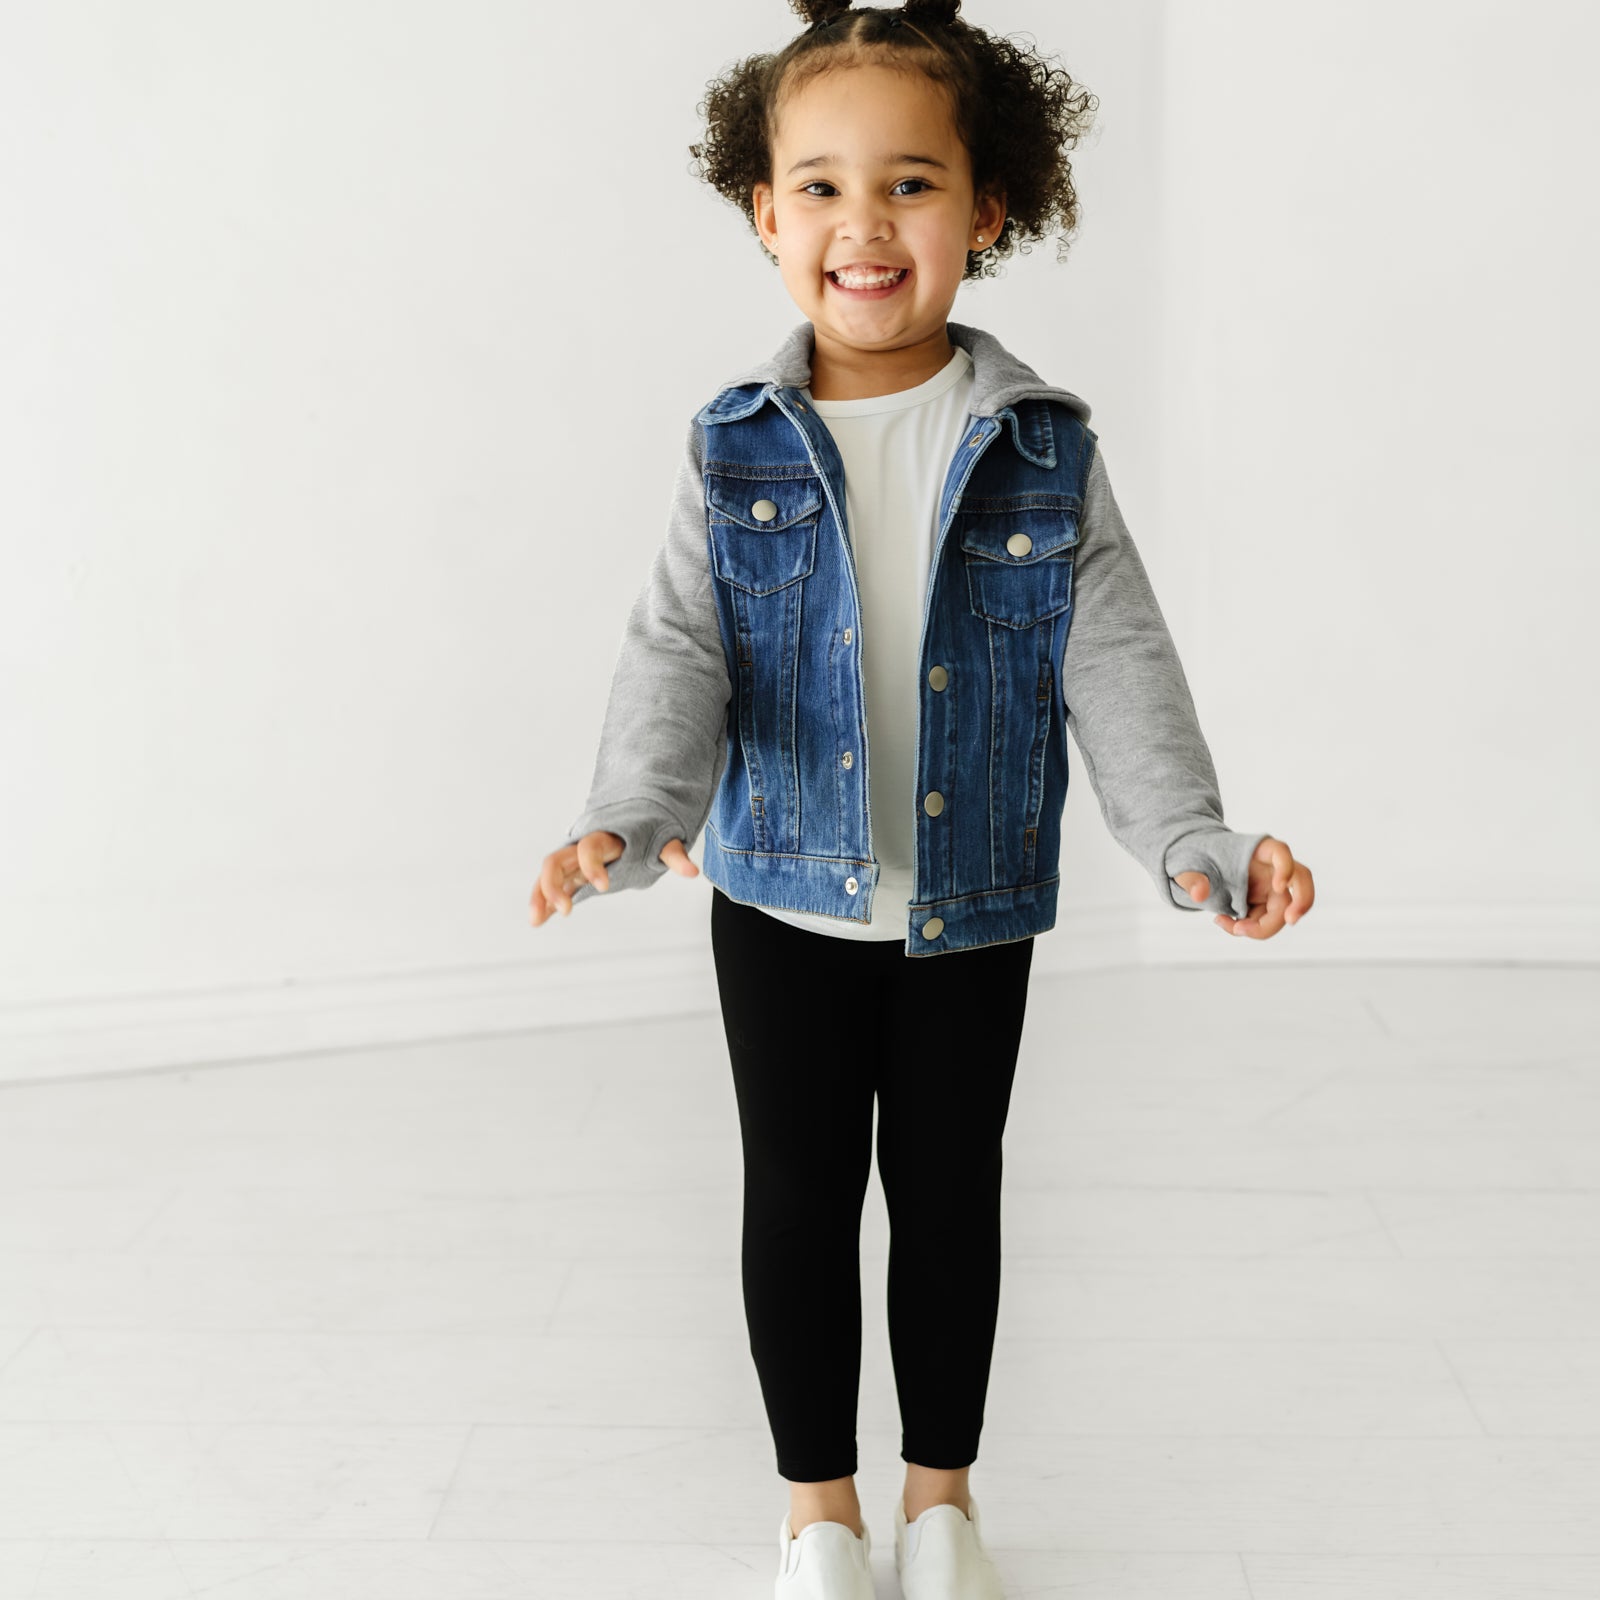 Alternate image of a child wearing a Midwash Blue Denim jacket and coordinating Play outfit